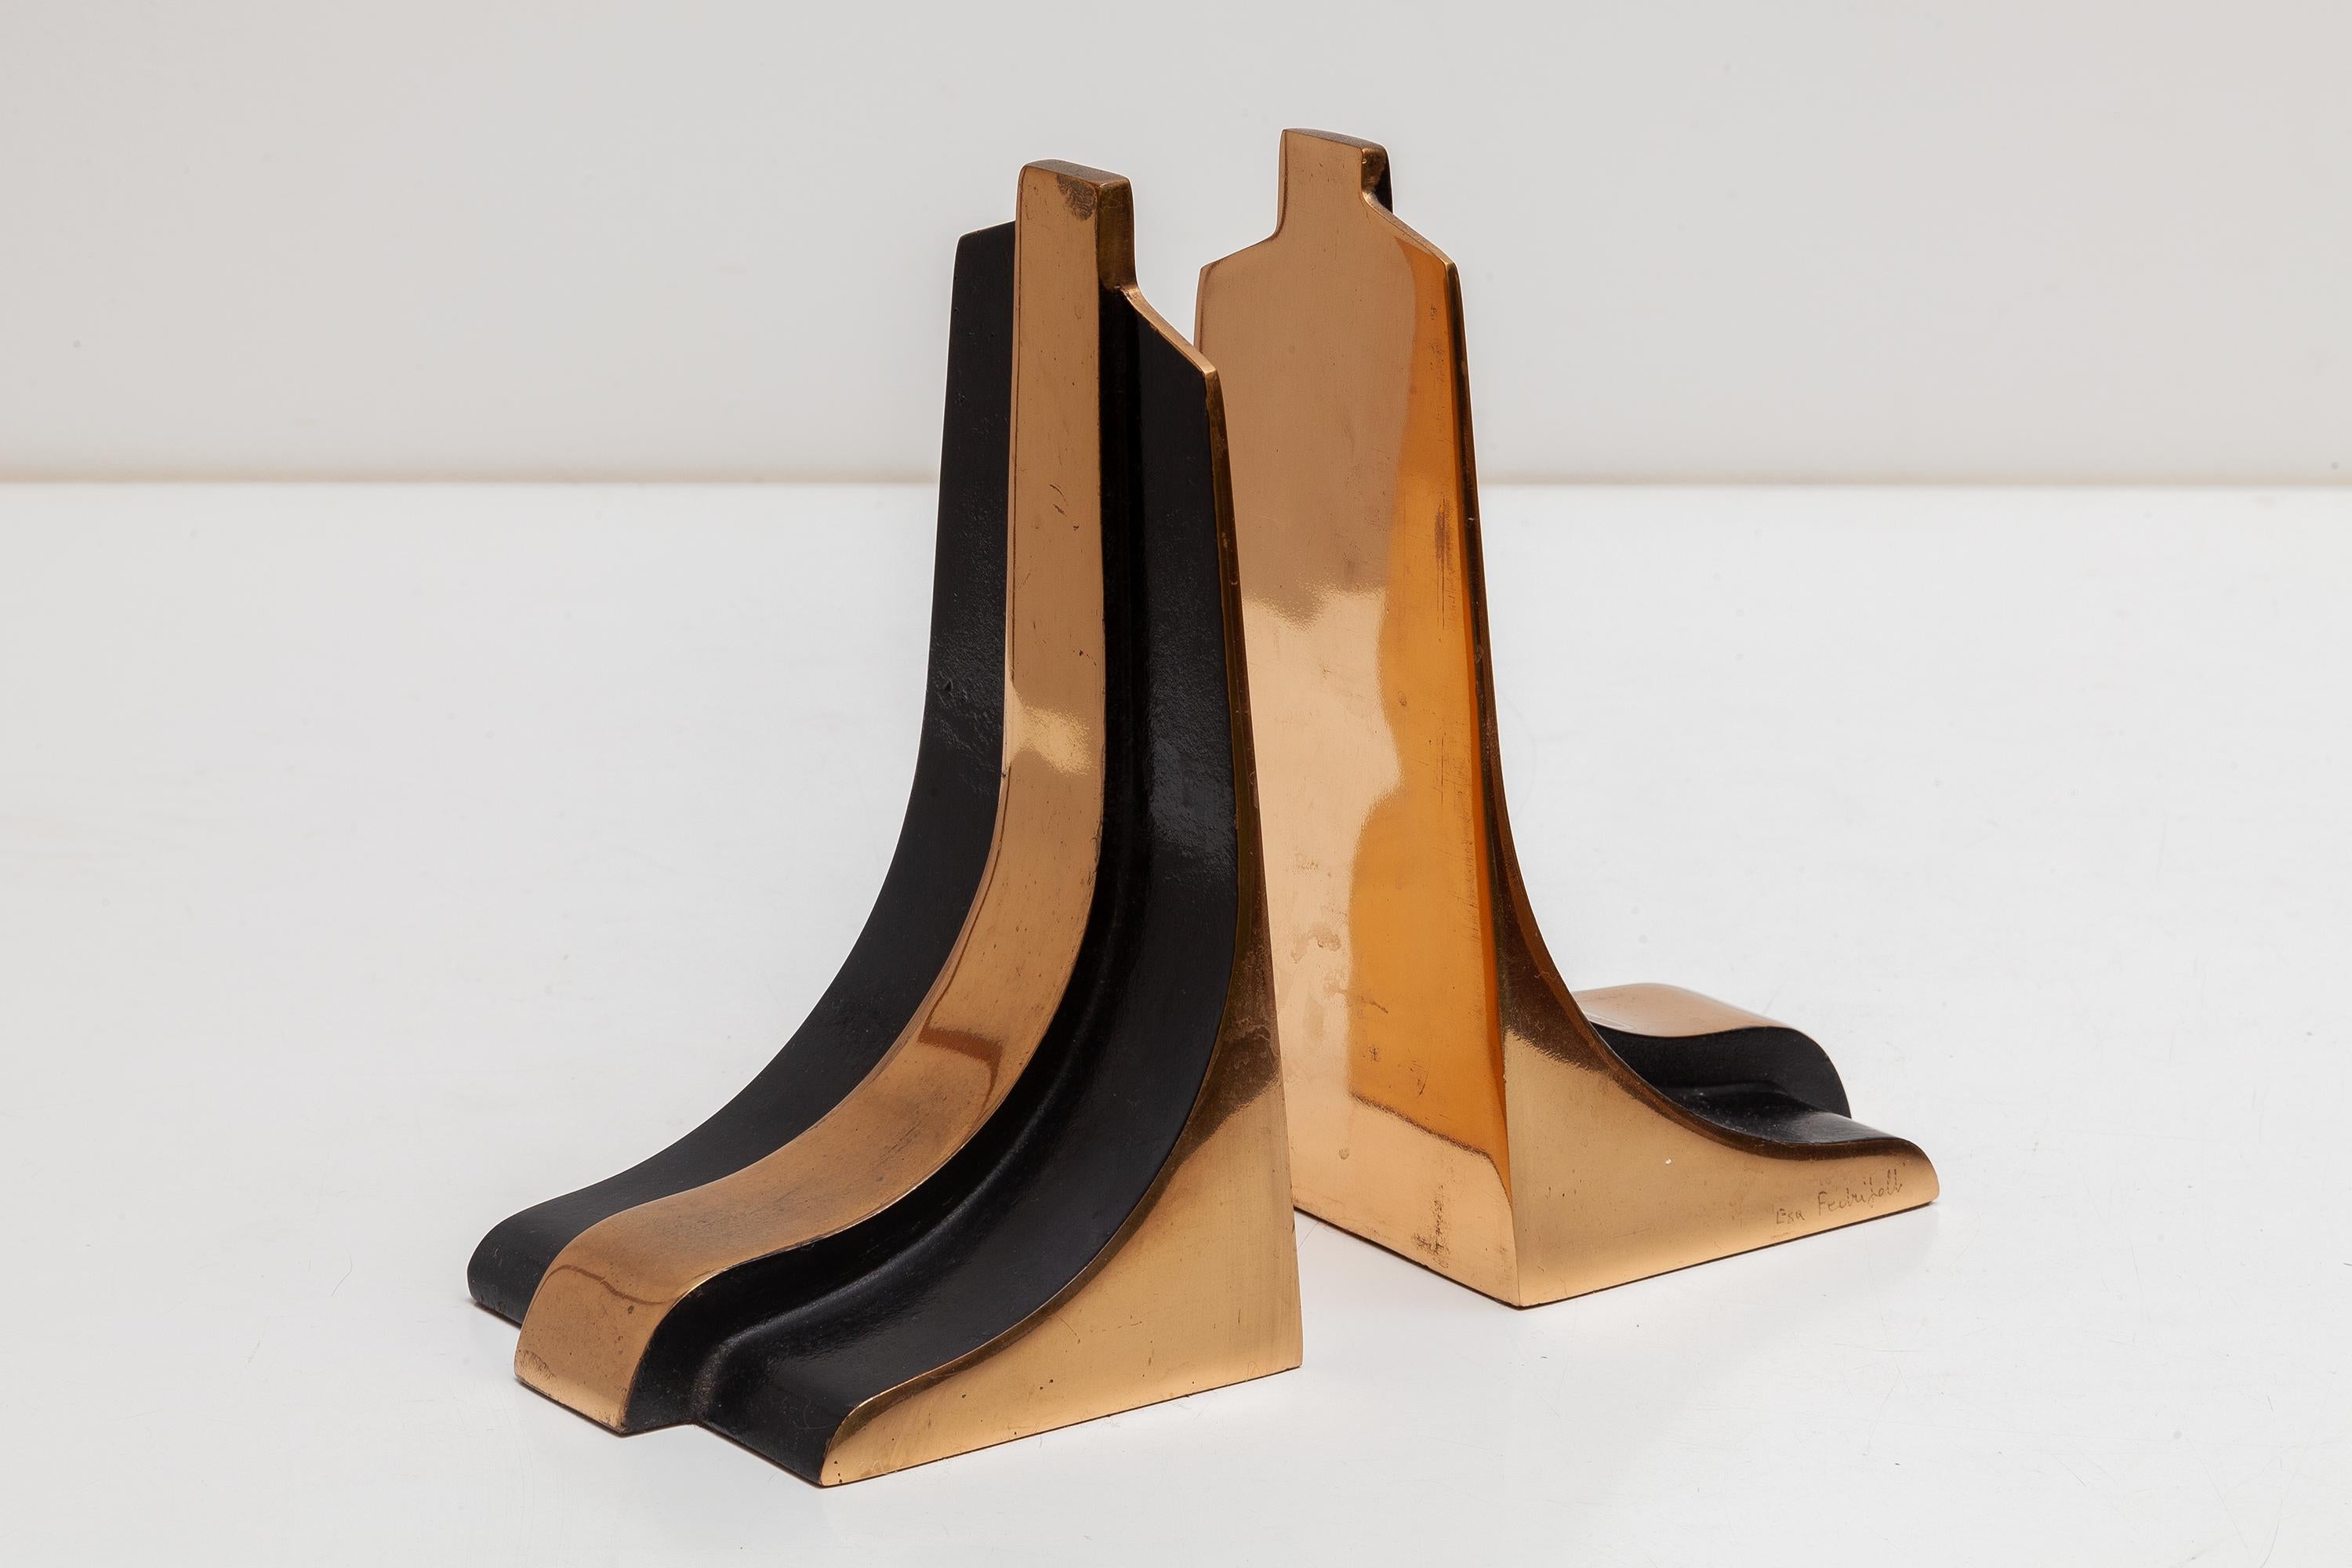 Rare set of bookends in bronze by Esa Fedrigolli, vintage design from the period 1970-1979. Minimalist style. Heavy cast bronze with felt bottoms. Signed by the artist and each is with original Manufacturer's label to underside 